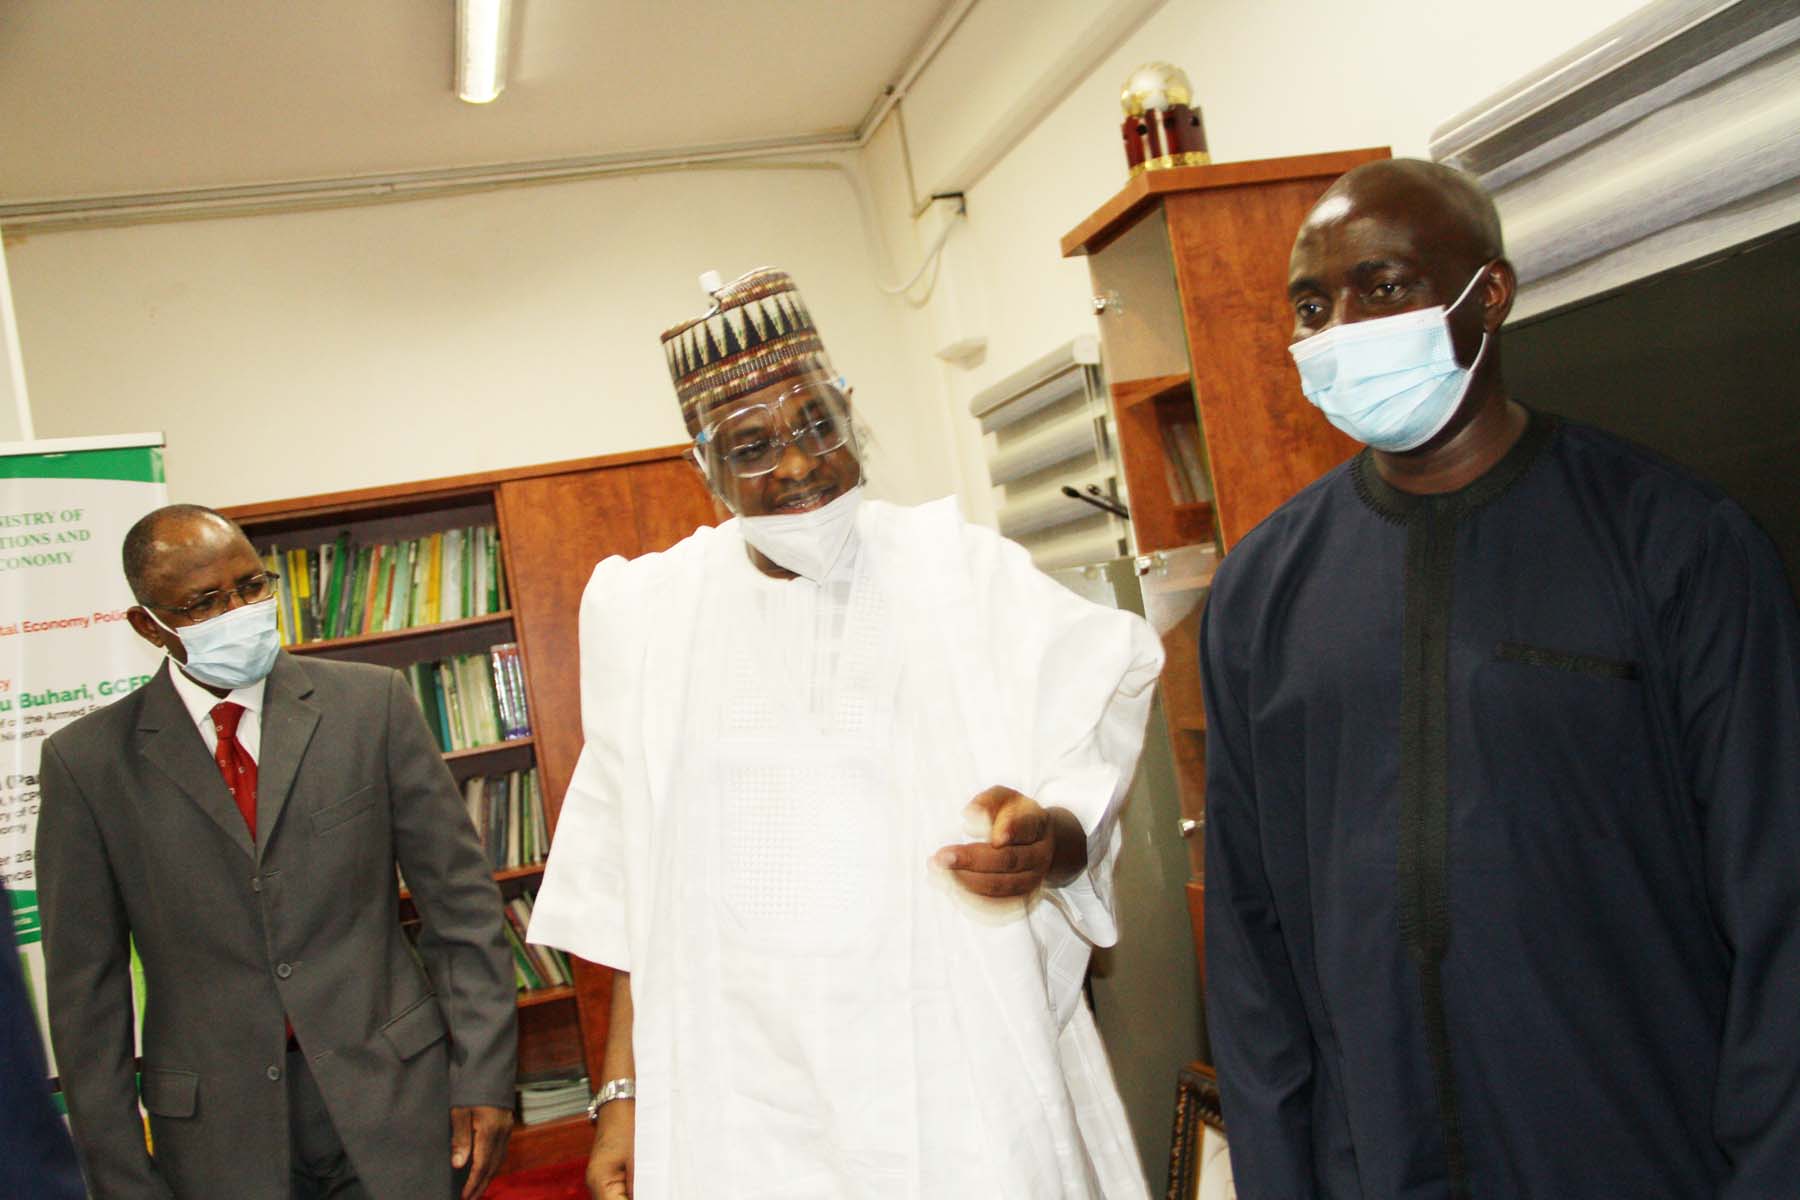 L-R,  Director General, Securities and Exchange Commission Mr. Lamido Yuguda, Minister of Communications and Digital Economy Mr Ali > Pantami and Assistant Director, SEC Mr Bagudu Waziri during a Meeting > between SEC and > Minister of Communications and Digital Economy in Abuja > yesterday